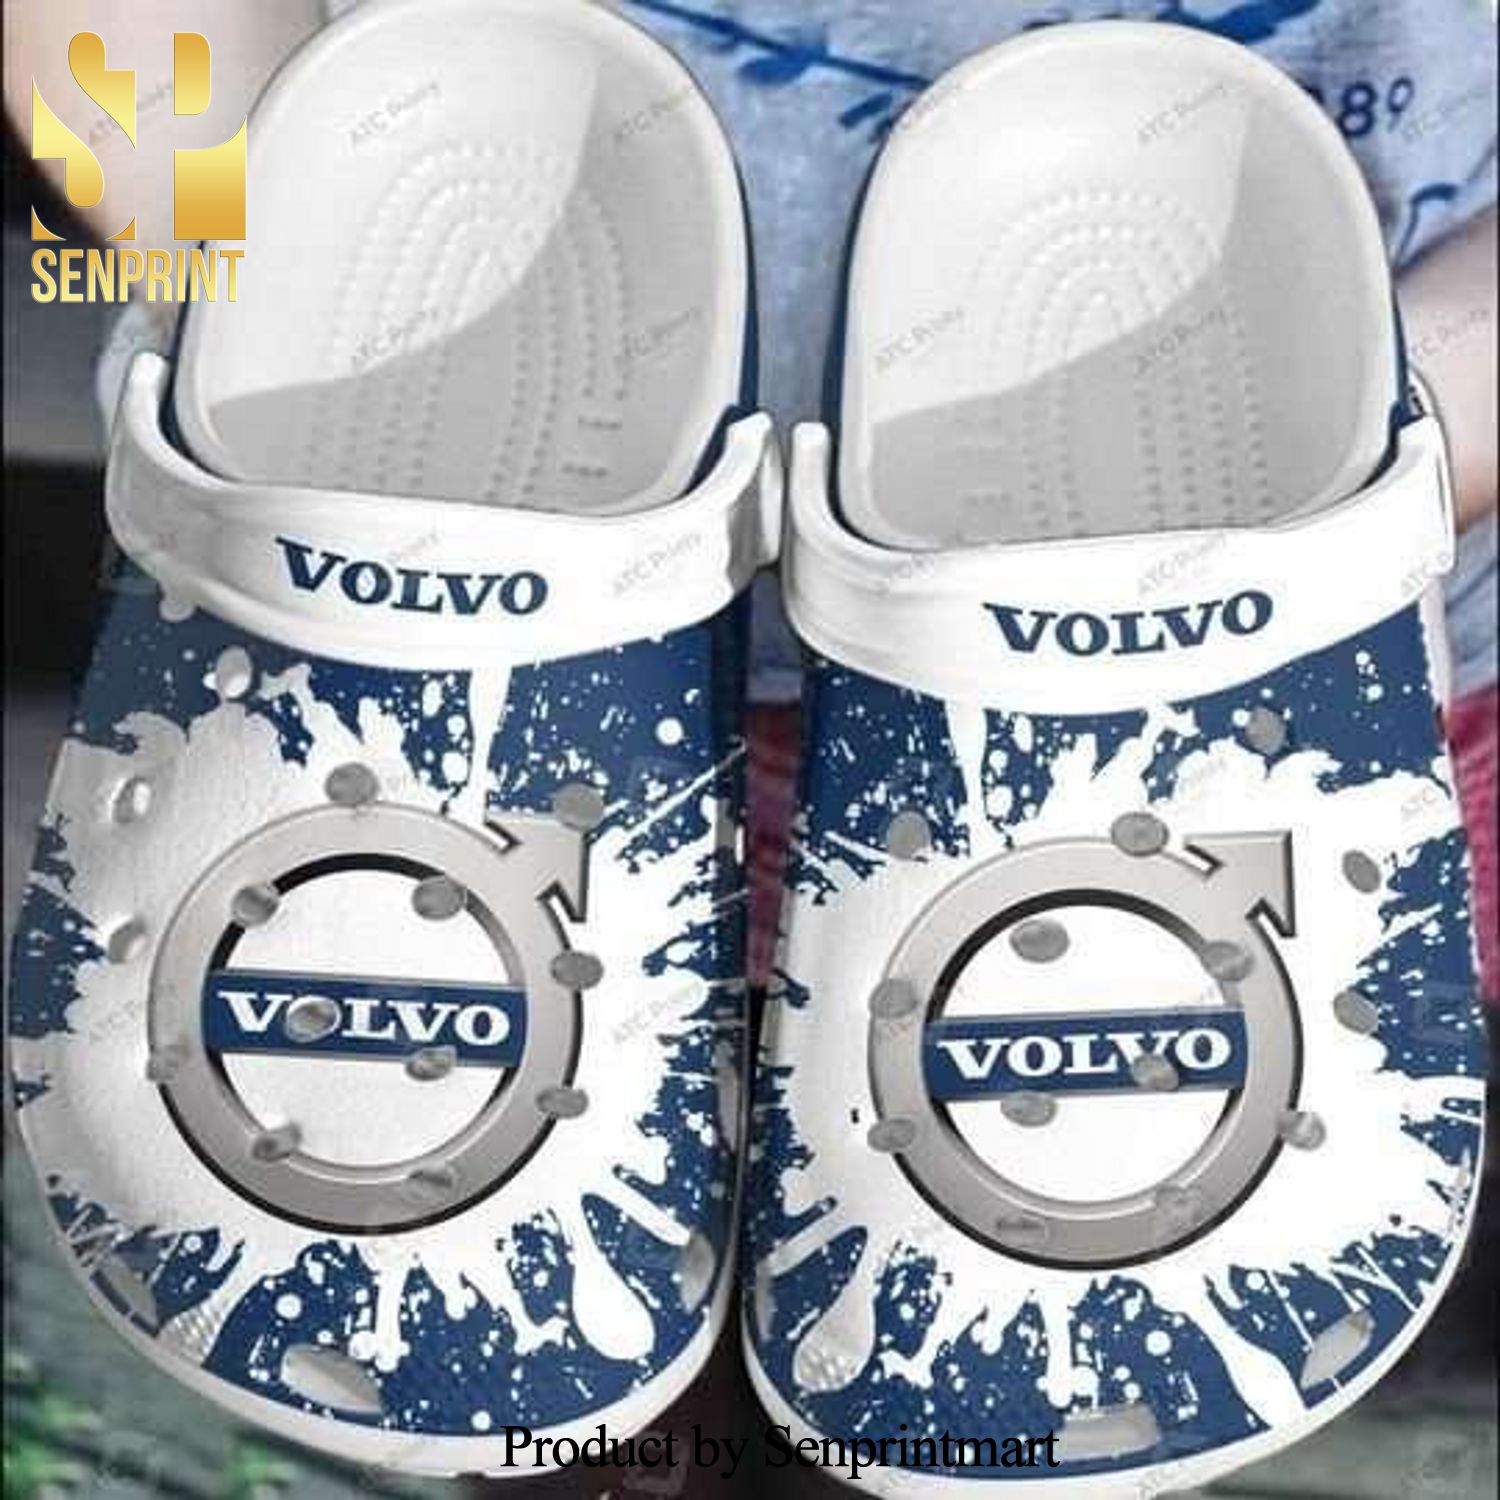 Volvo All Over Printed Crocs Sandals